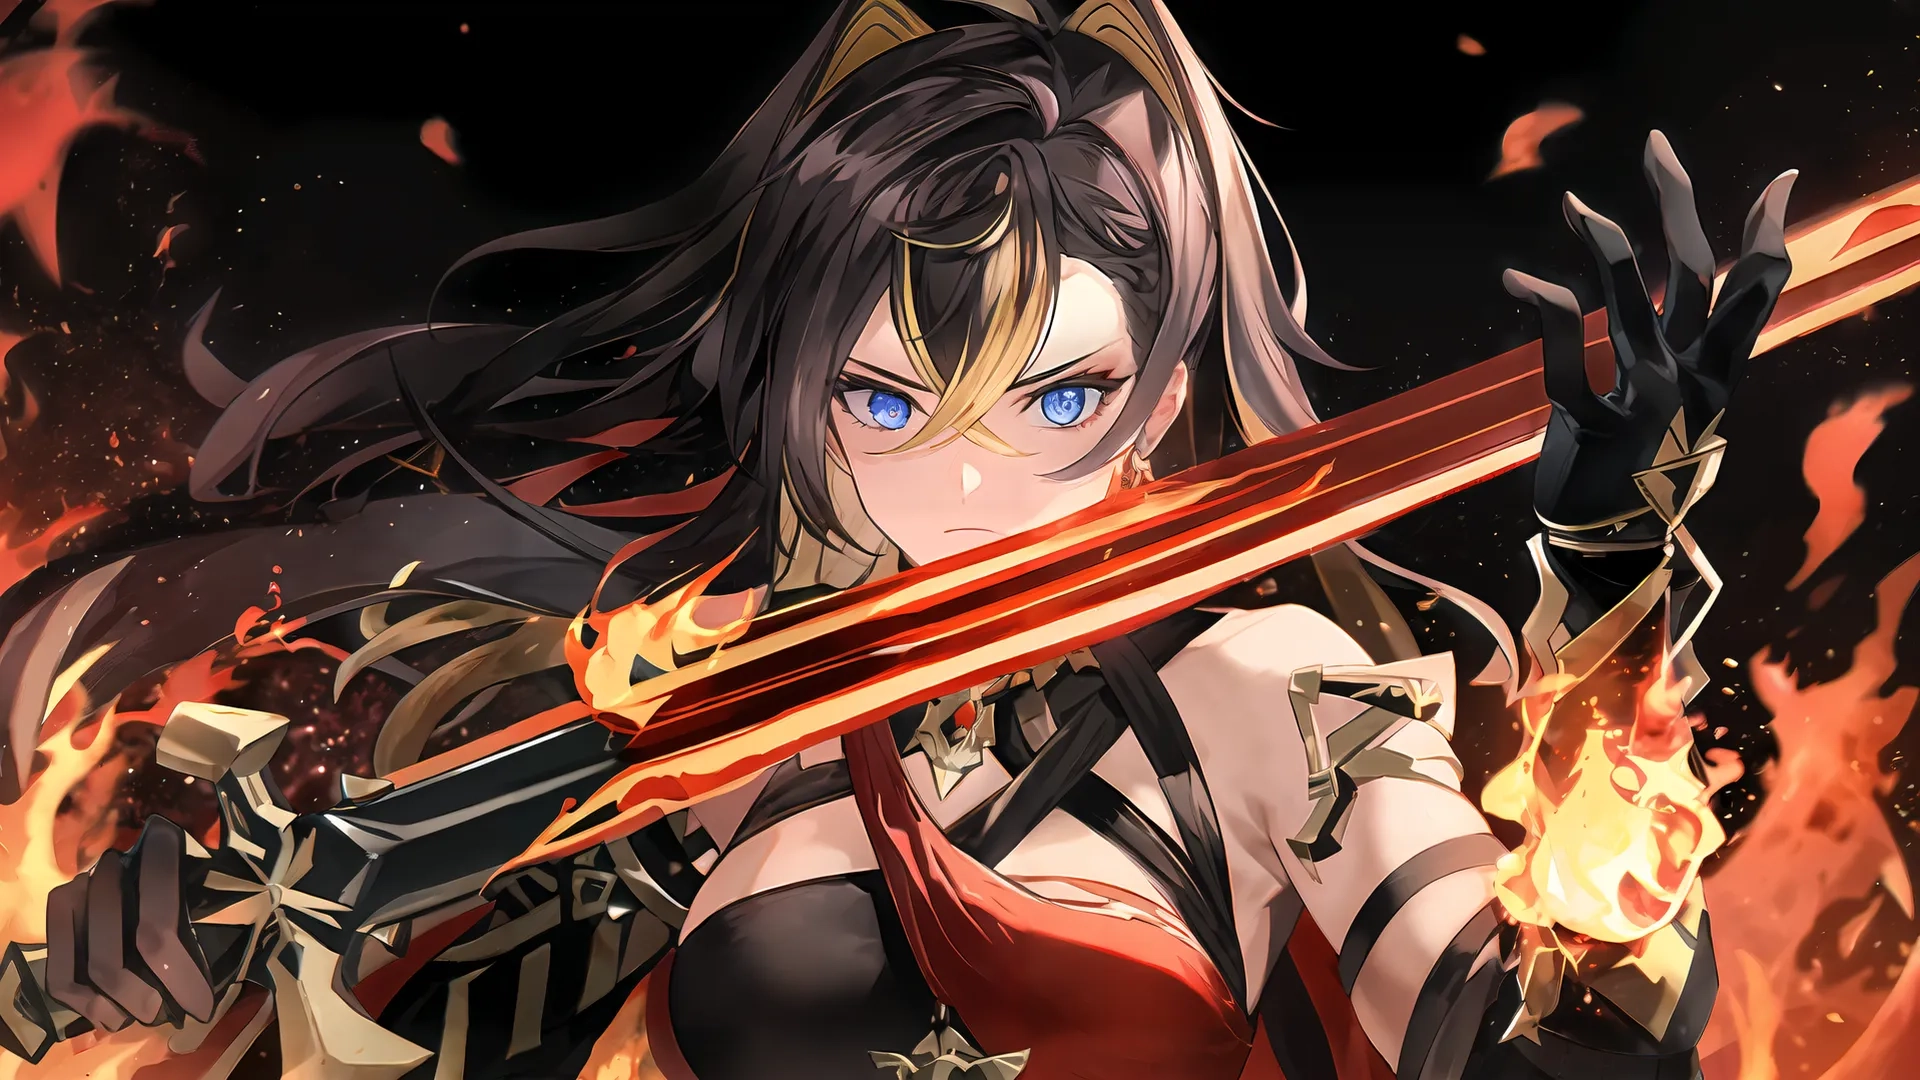 an image of a anime character with fire in the background and flames around her from behind her shoulders, the character wears armor like a knight
